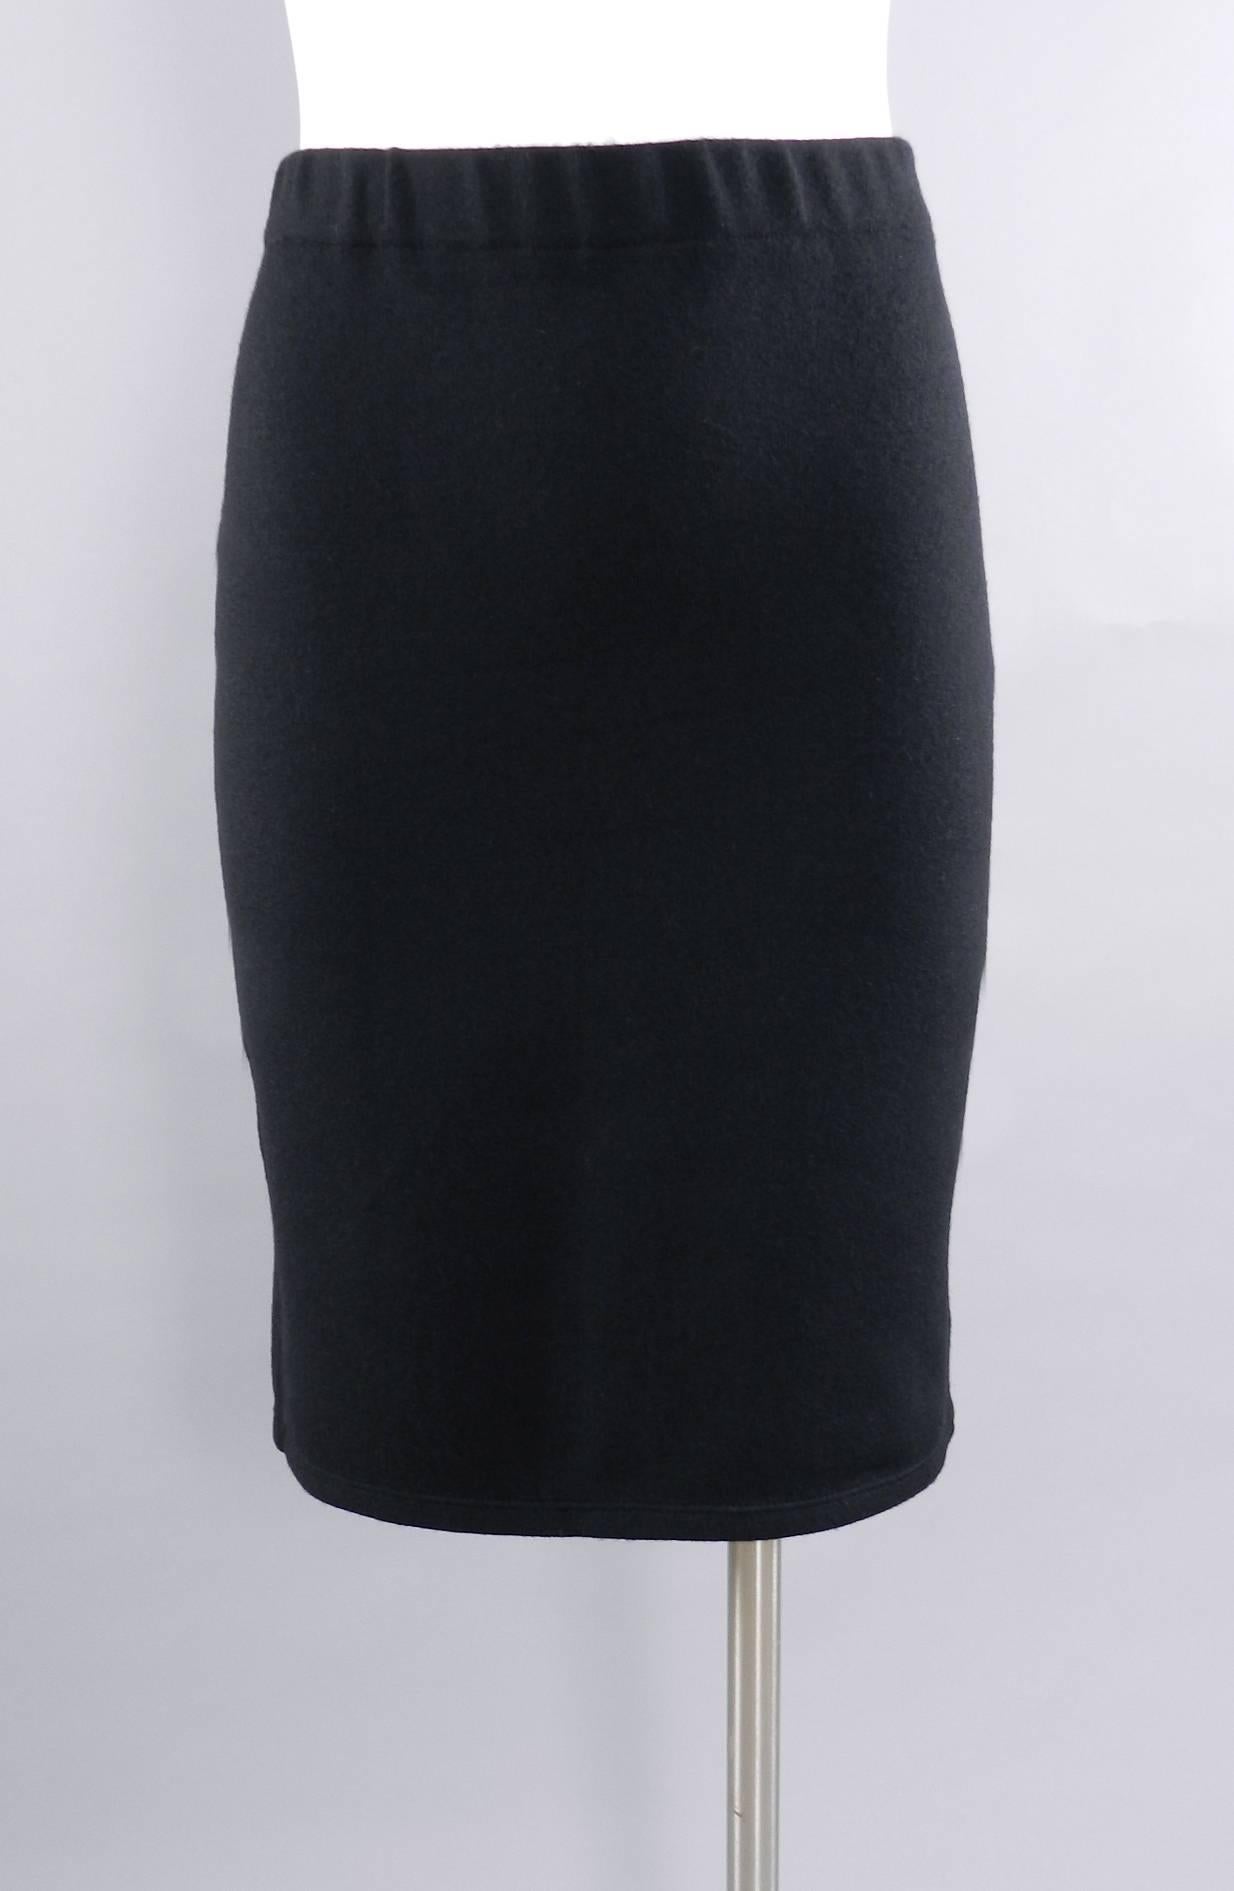 Chanel black knit jersey tube skirt with CC buttons.  Excellent pre-owned condition. Original size tag has been removed but likely a FR 42 (USA 8 or 10). Elastic waistband will fit about 29-32